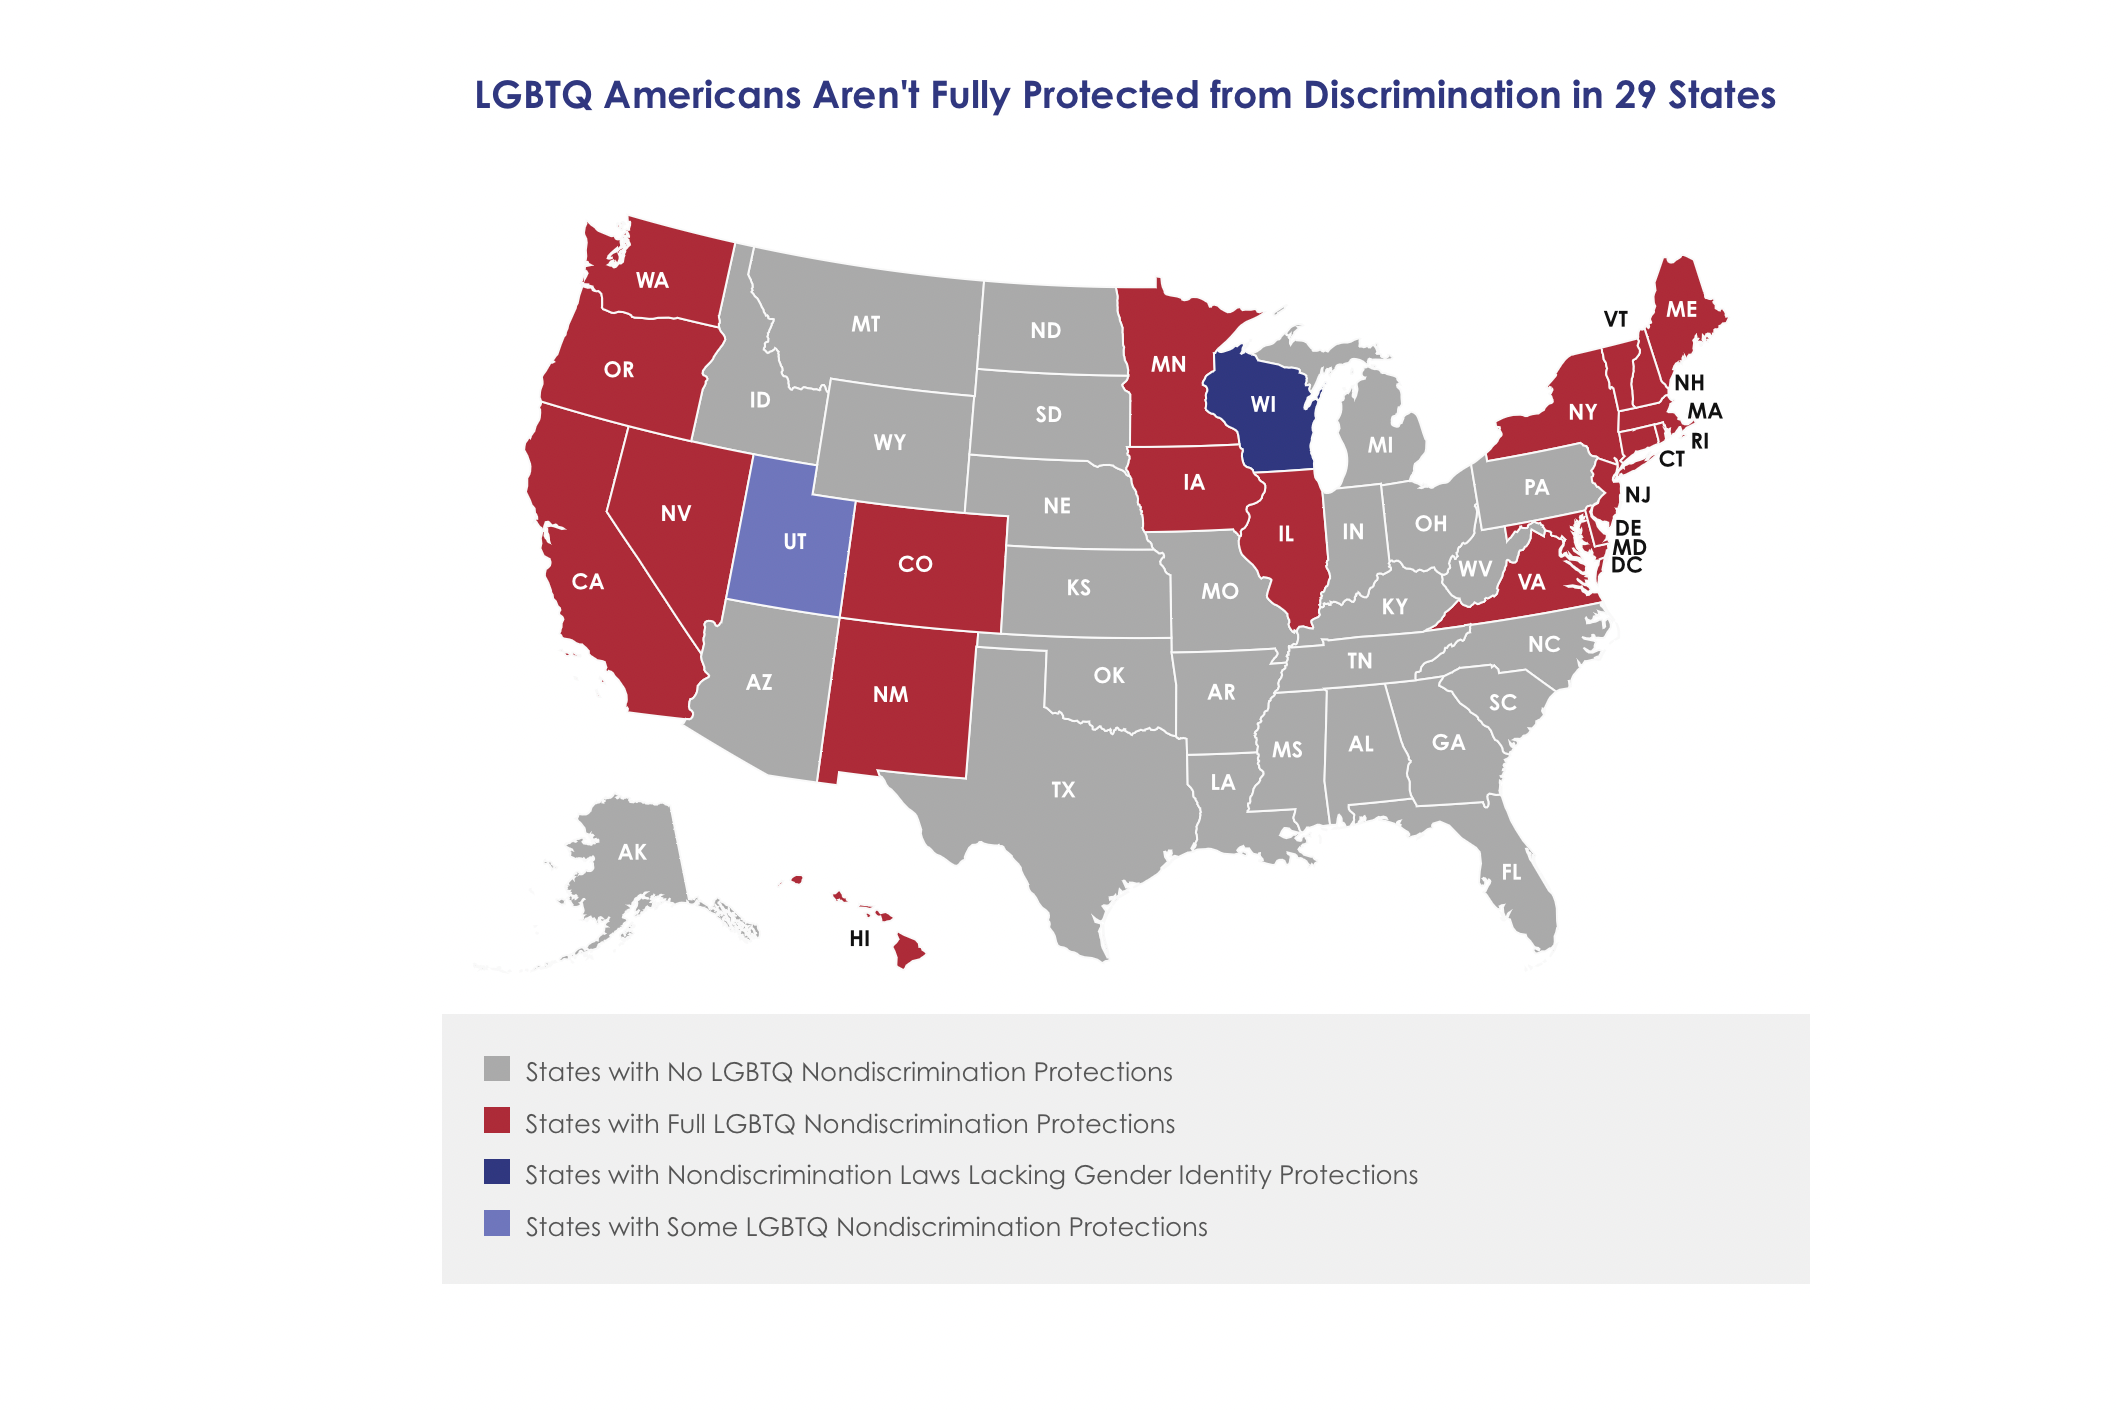 A map of the United States illustrating states with LBGTQ nondiscrimination policies